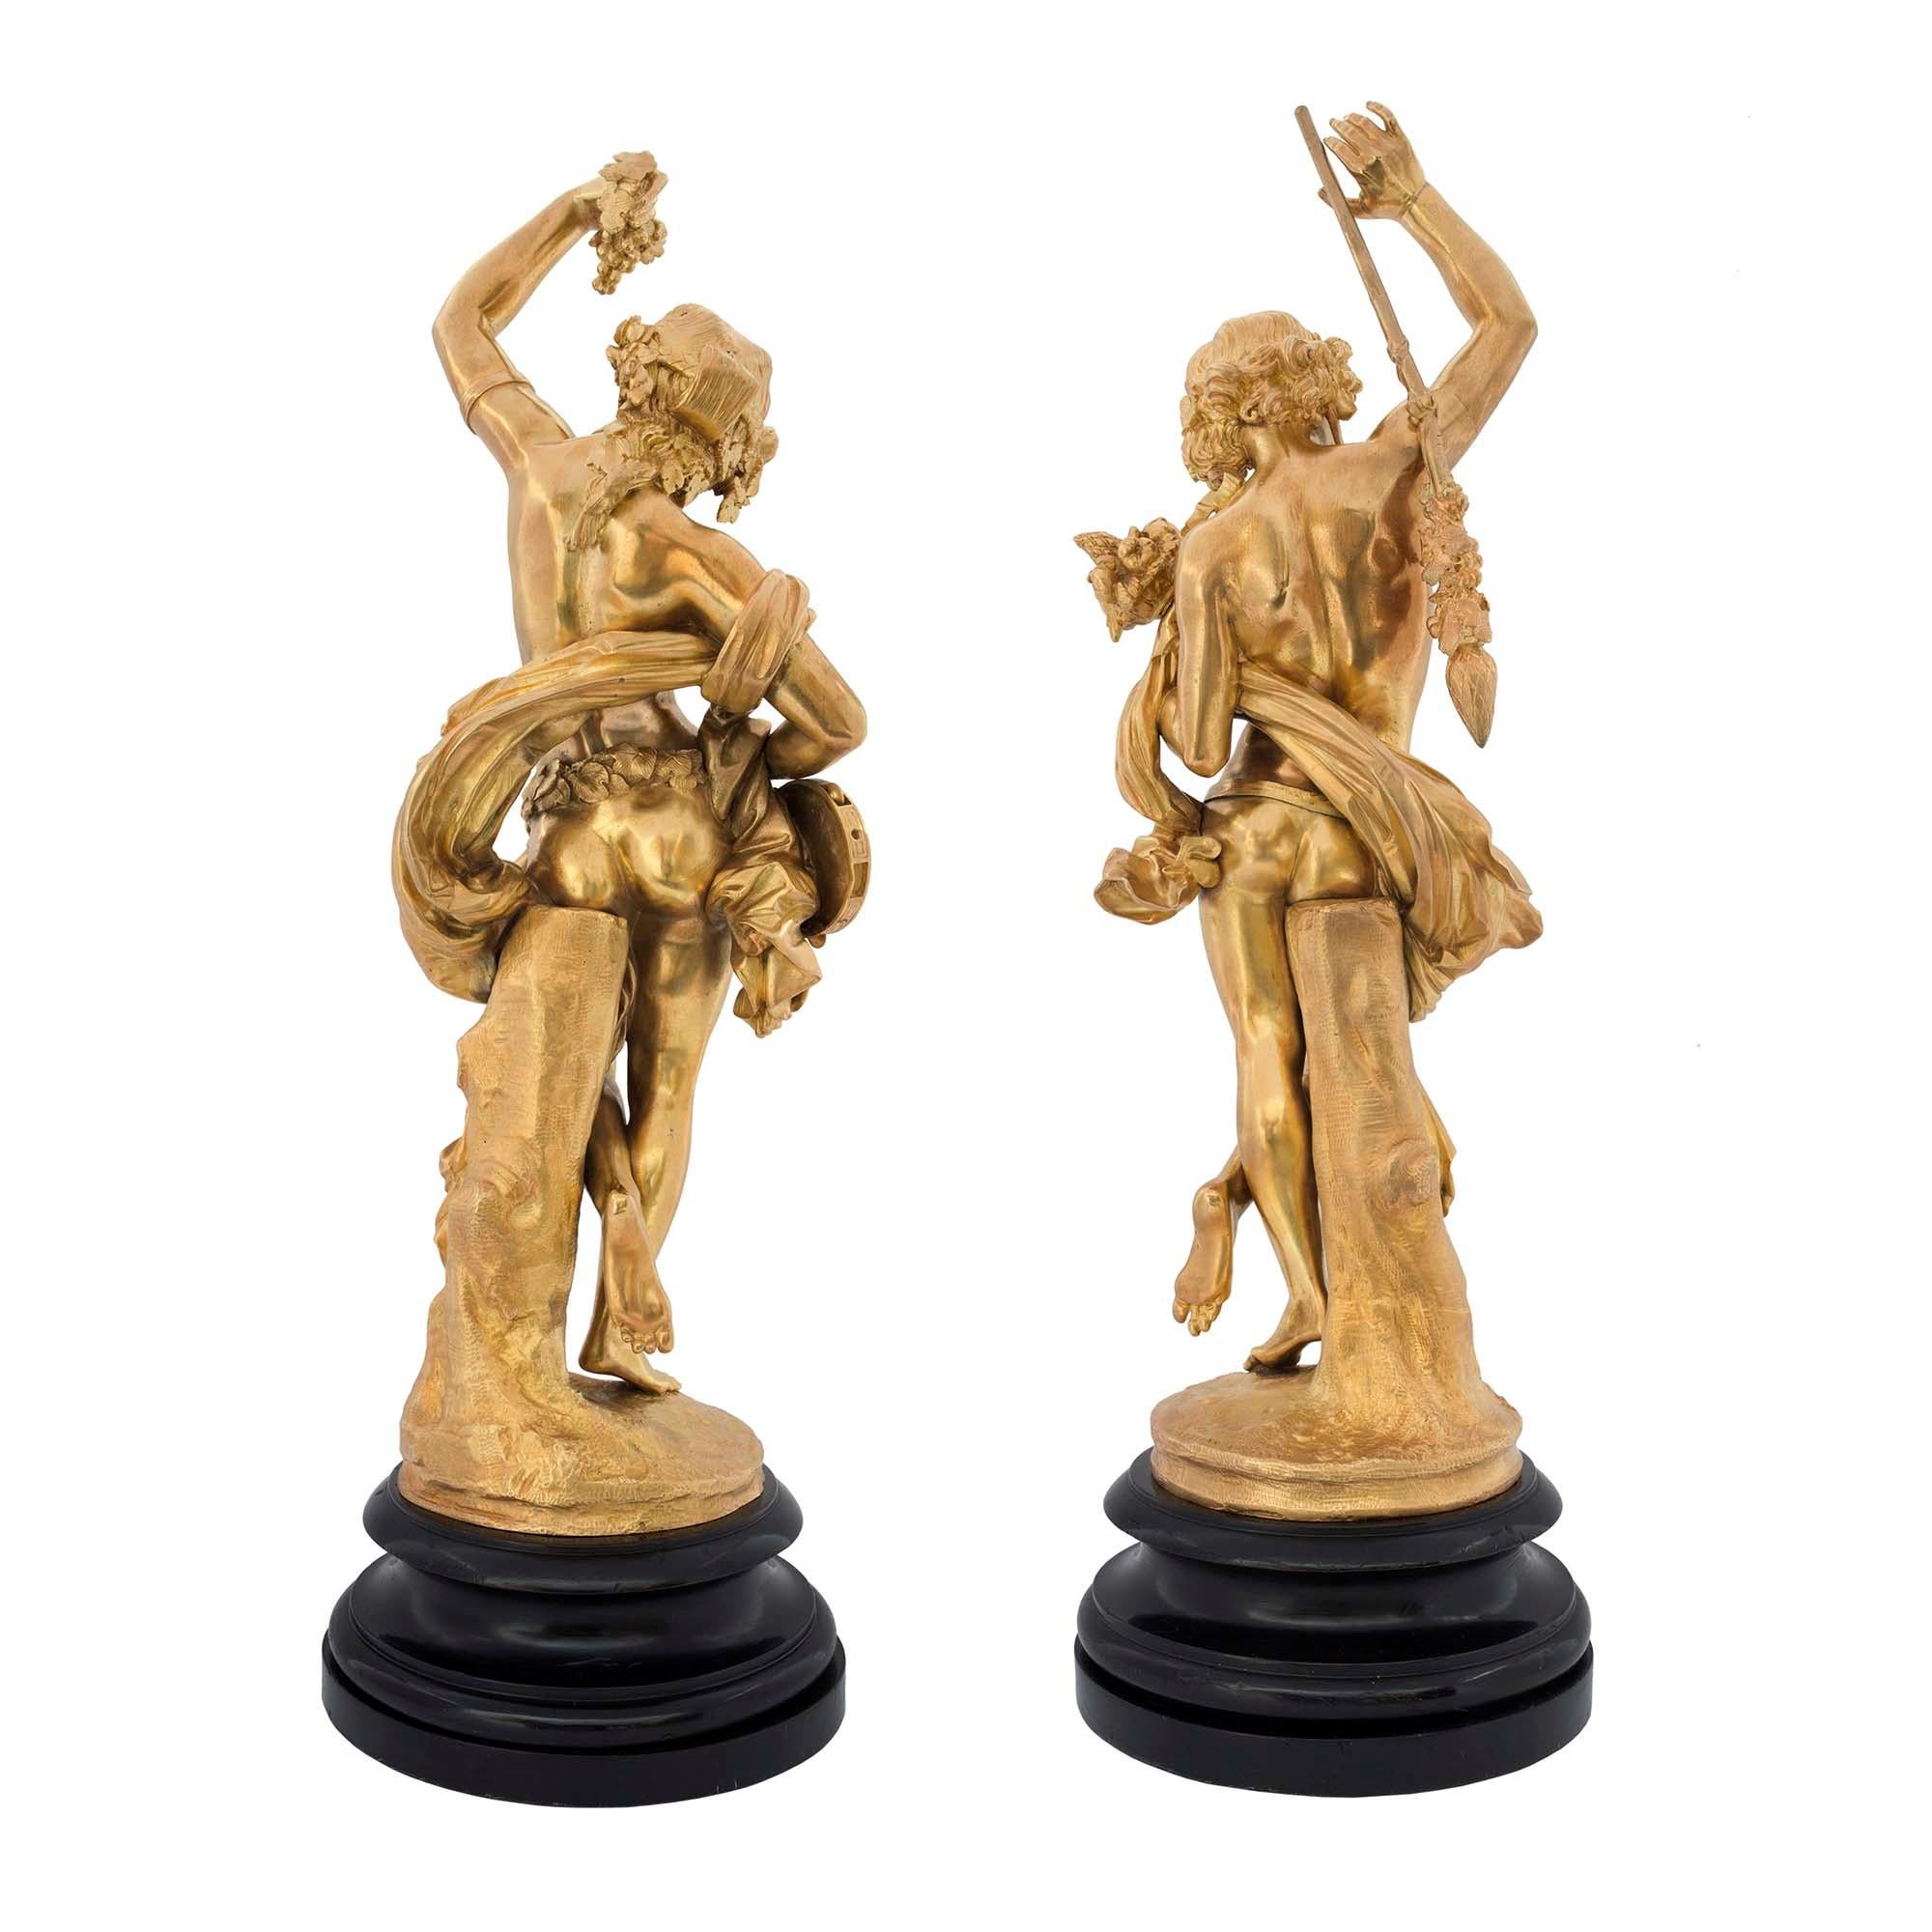 French Louis XVI Style Ormolu Festive Figural Statues, Signed Devaulx In Good Condition For Sale In West Palm Beach, FL